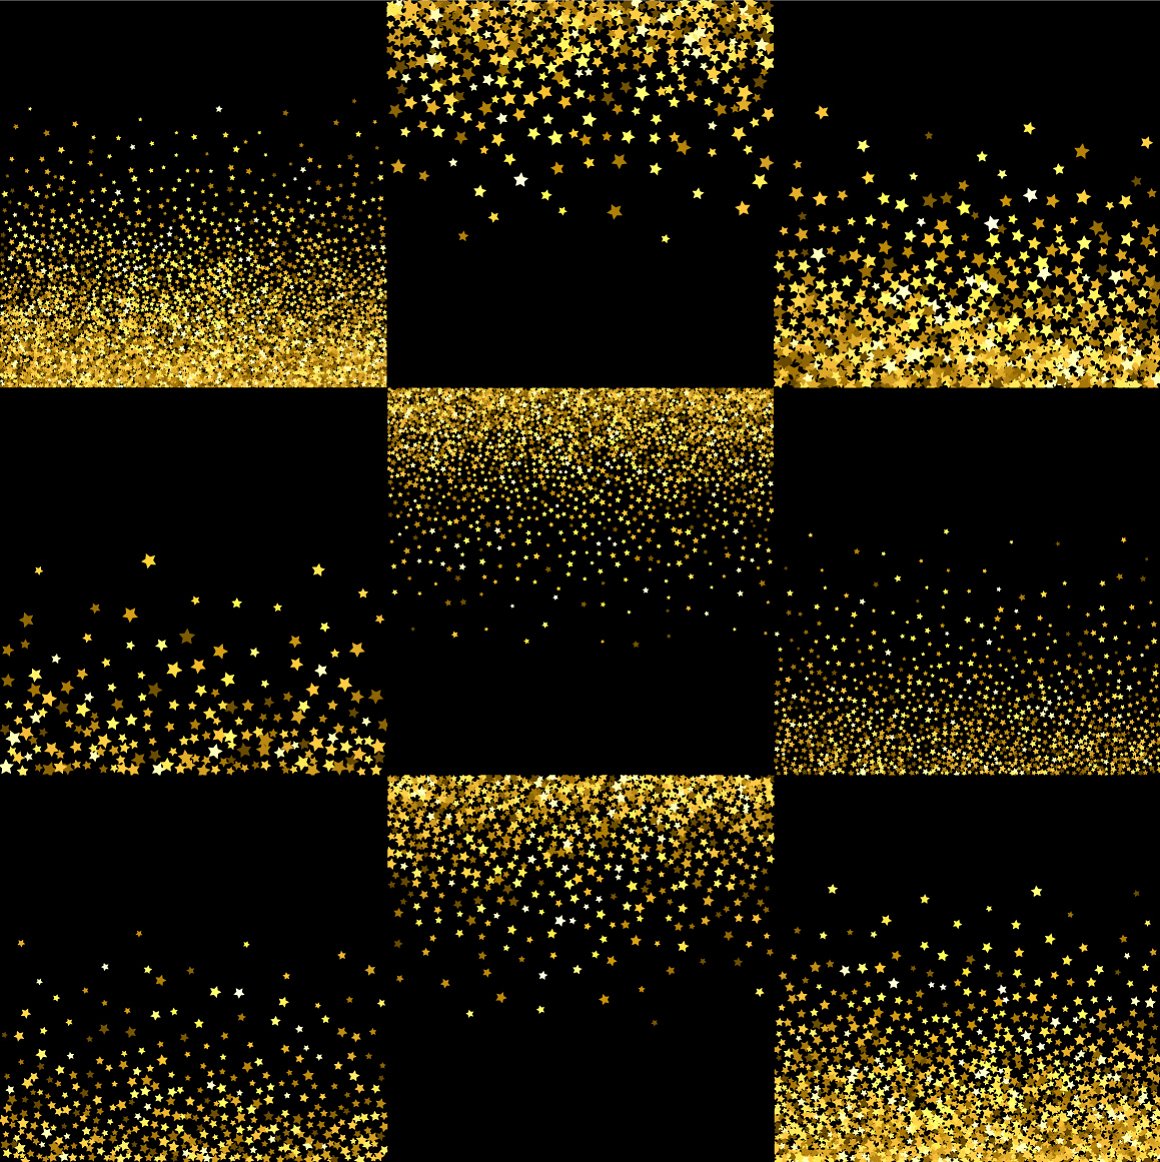 Black background with gold small stars.